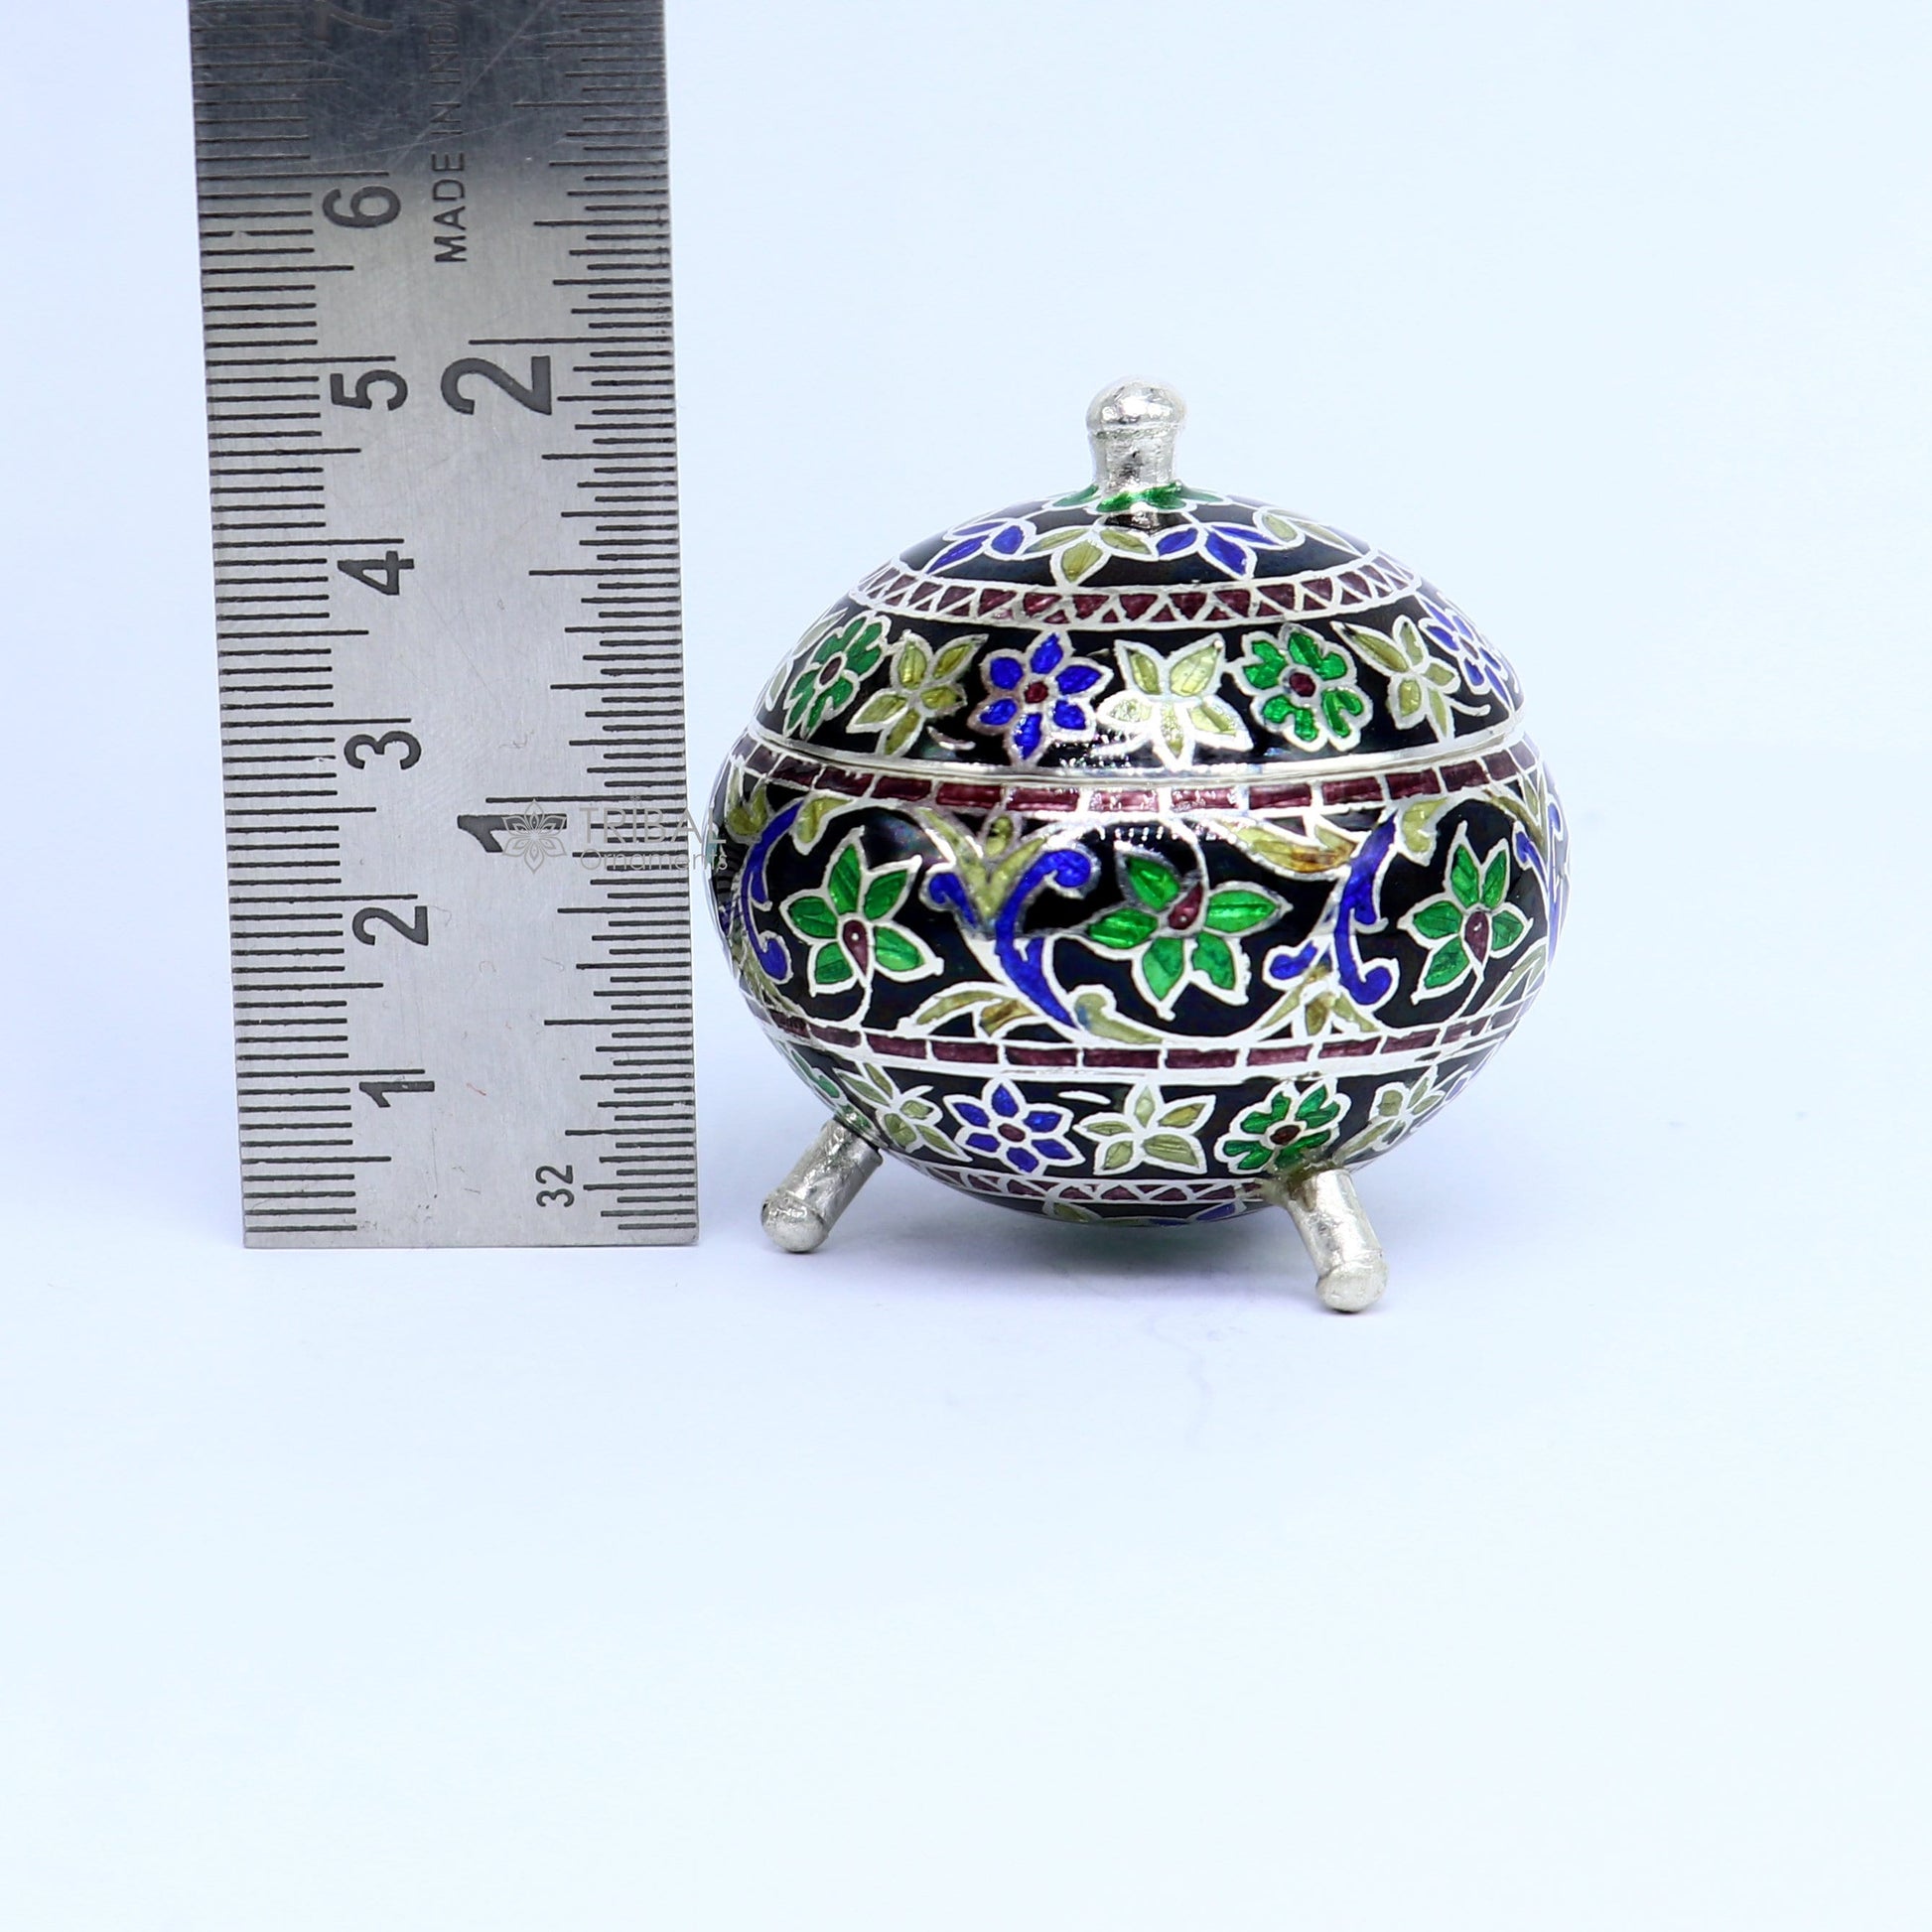 925 Sterling silver handmade fabulous trinket box, Silver container box, casket box, sindoor box, enamel work customized gifting box stb835 - TRIBAL ORNAMENTS